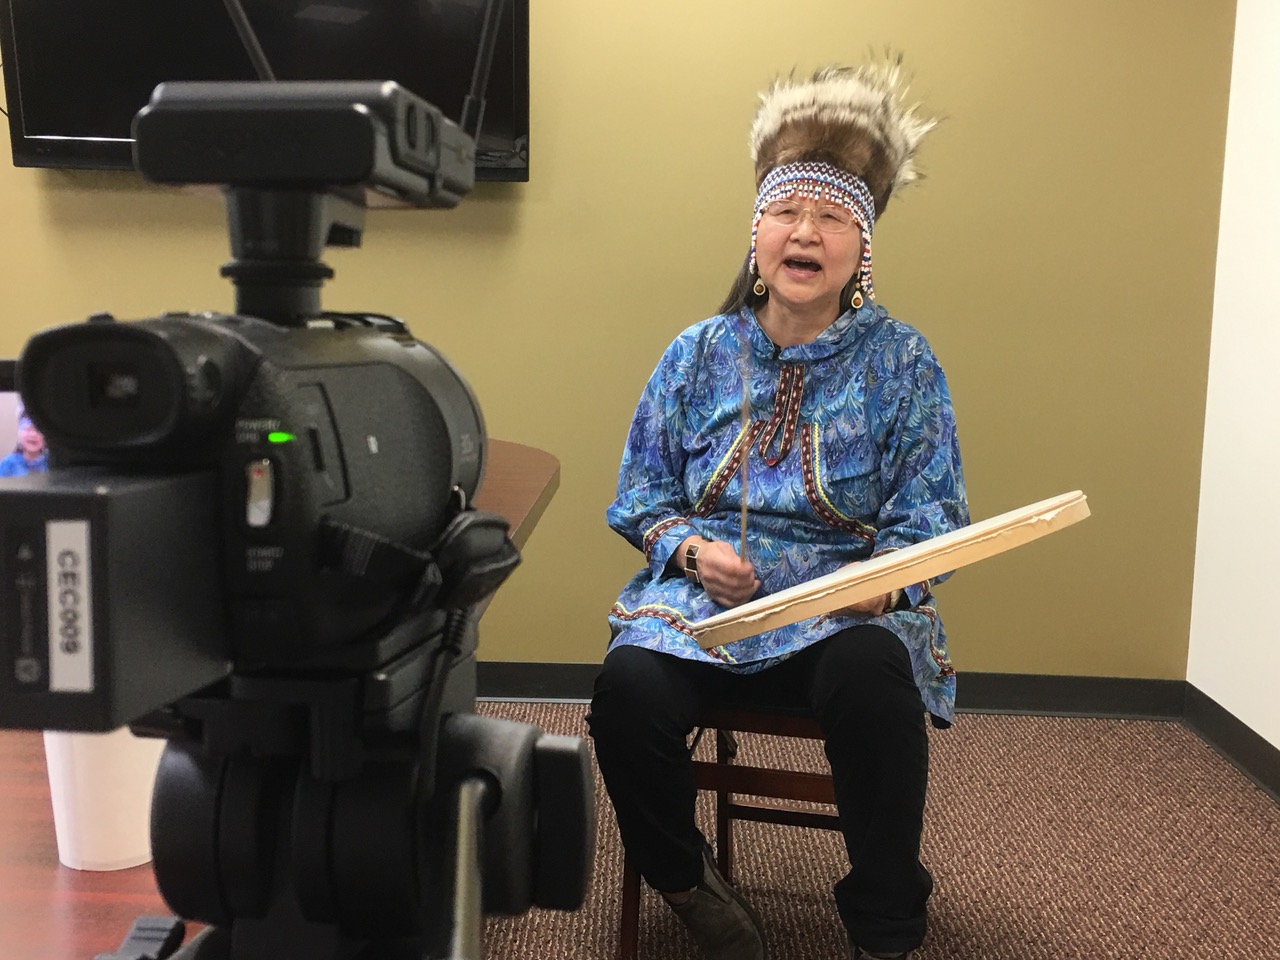 Video production shoot of an Alaska native woman in headdress and drum.